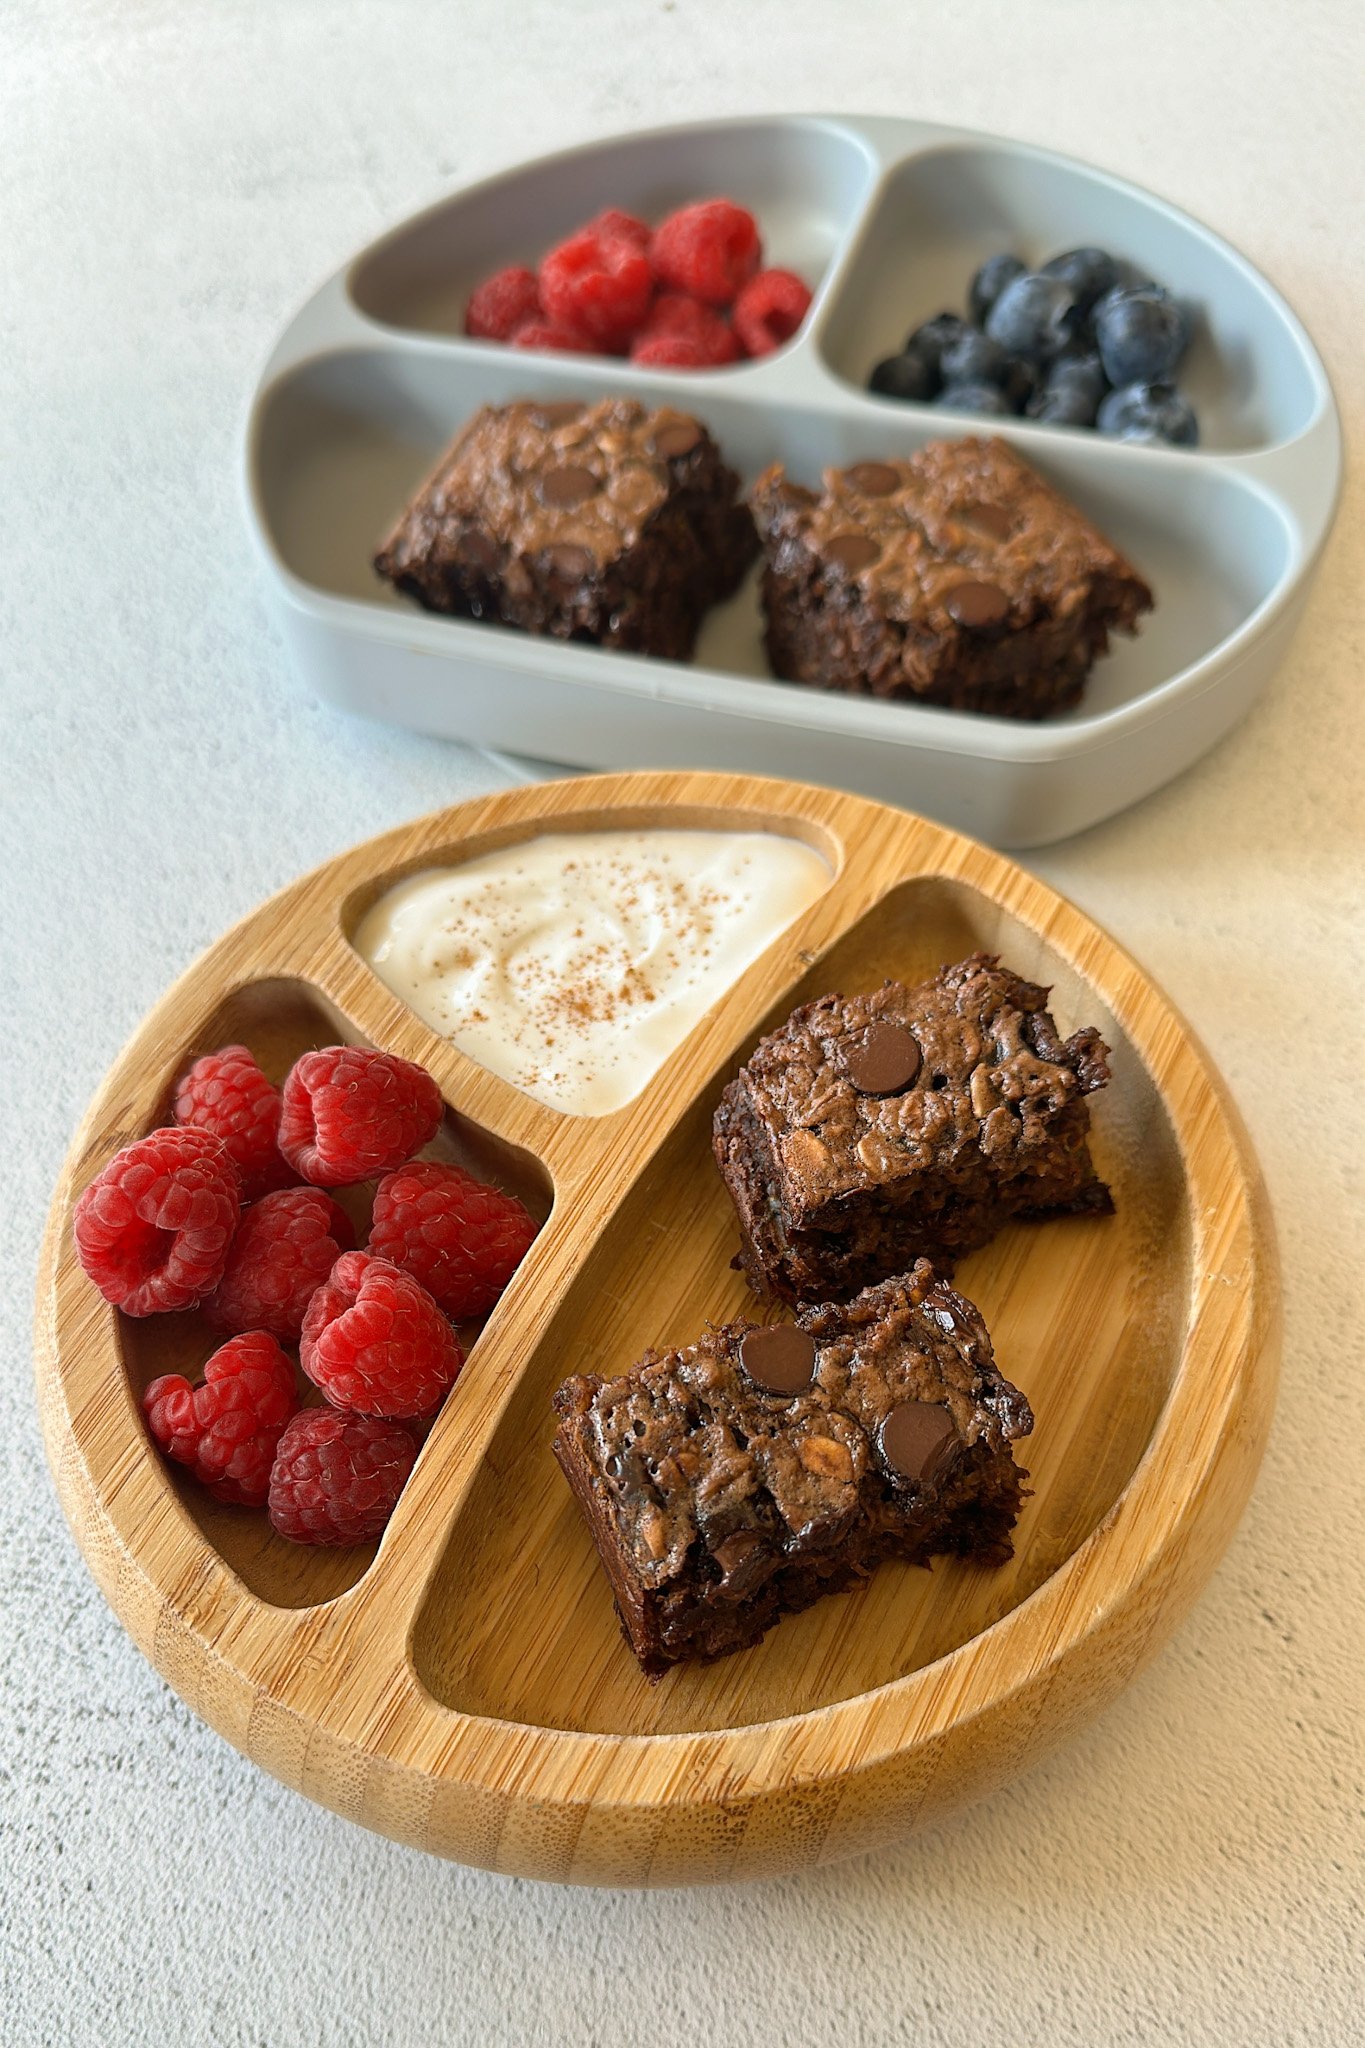 Chocolate baked oatmeal served with berries and yogurt.